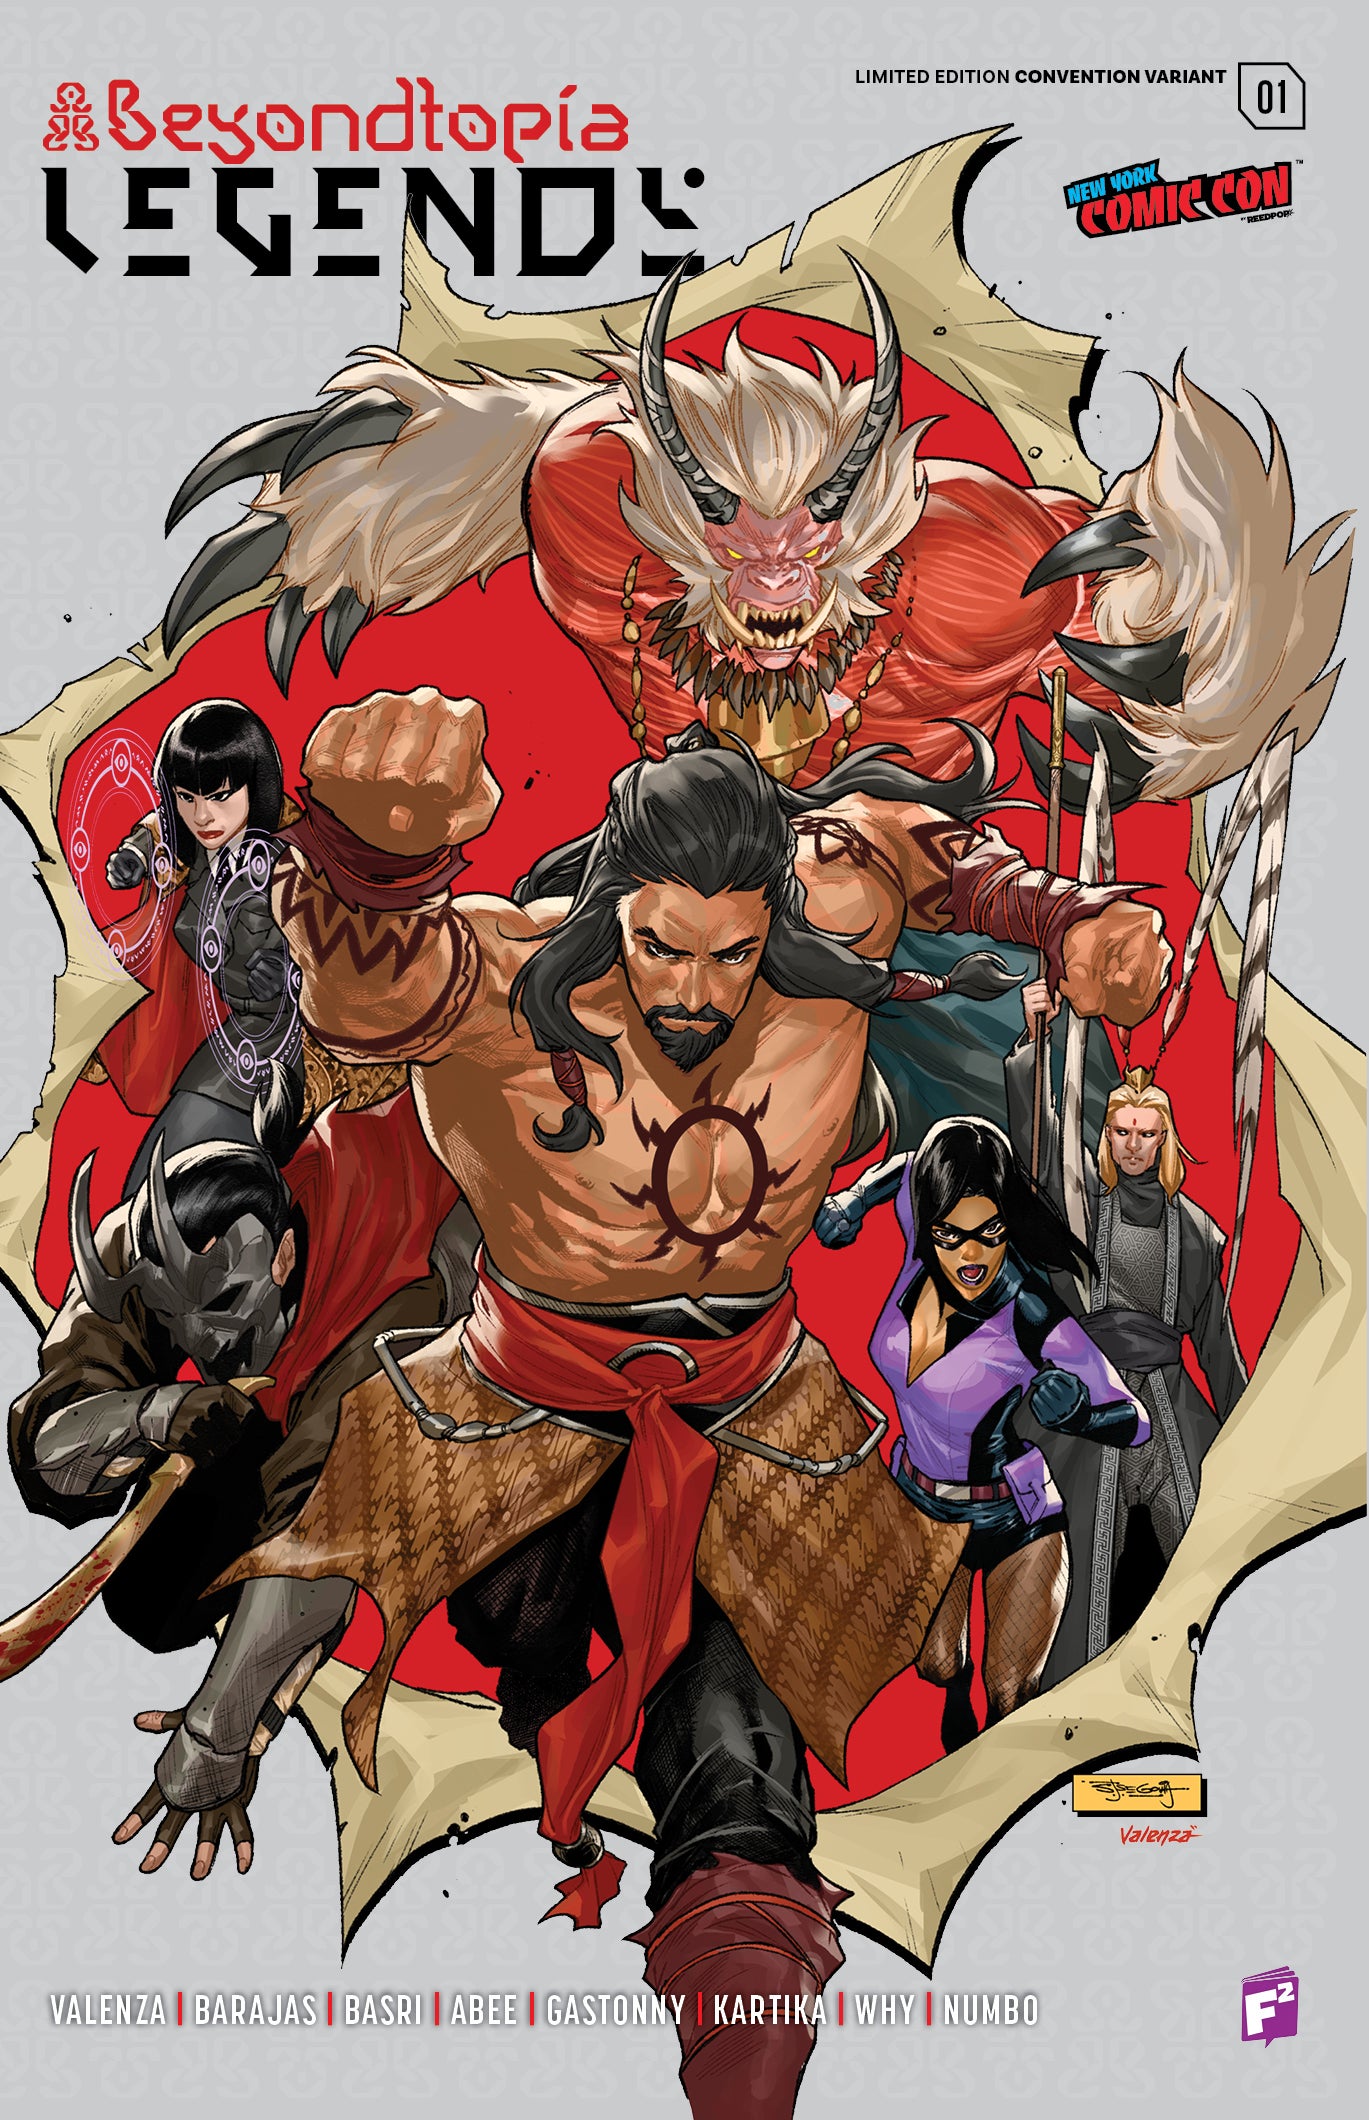 Beyondtopia Legends #1 cover